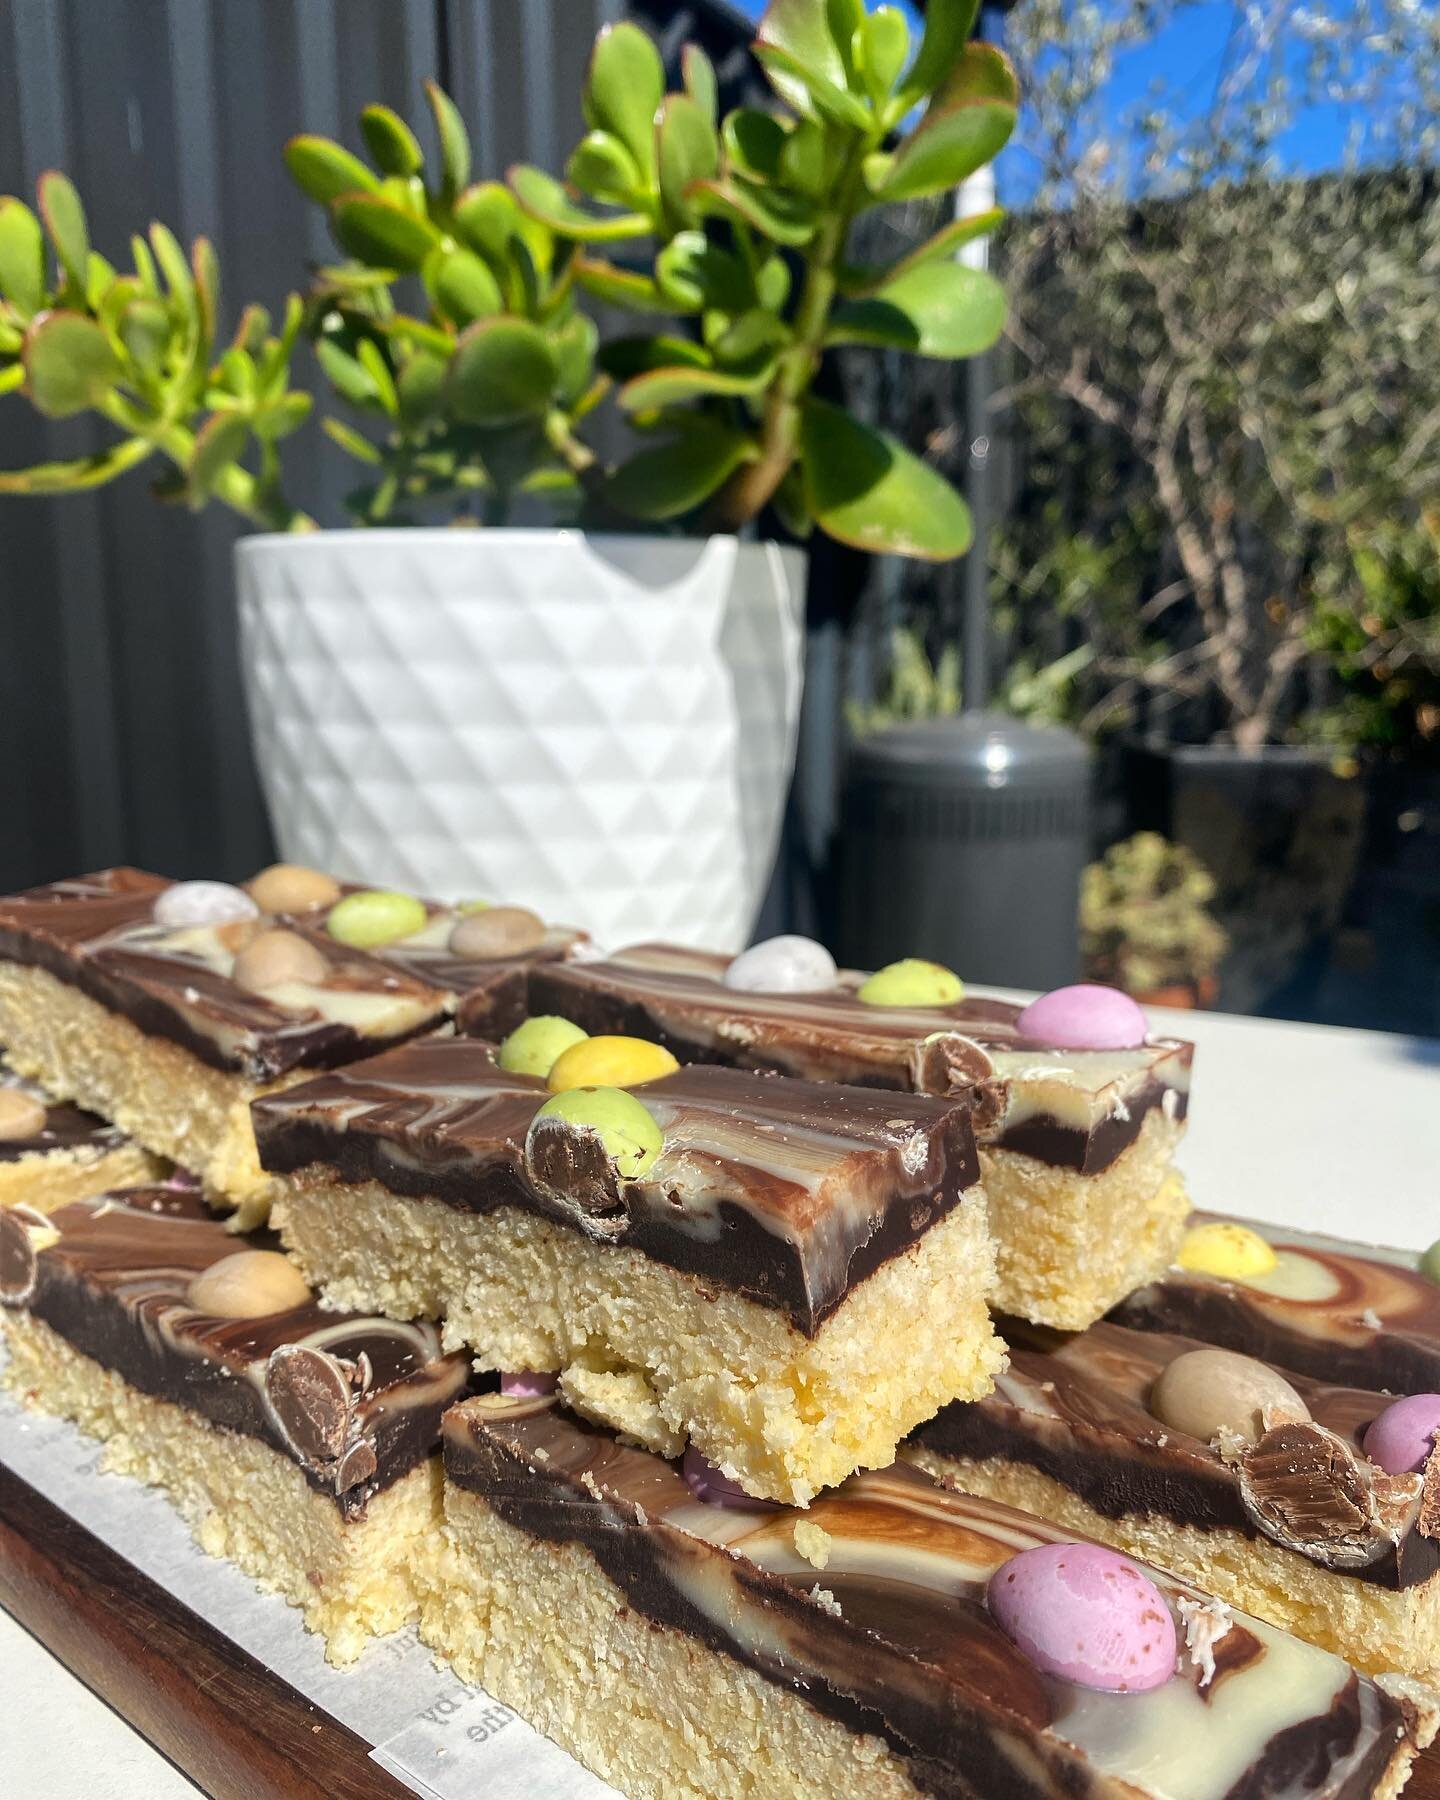 Our chef has made some special marble coconut cookie slices topped with lil chocolate eggs, grab some before they hop out the door this Easter 🐰👀